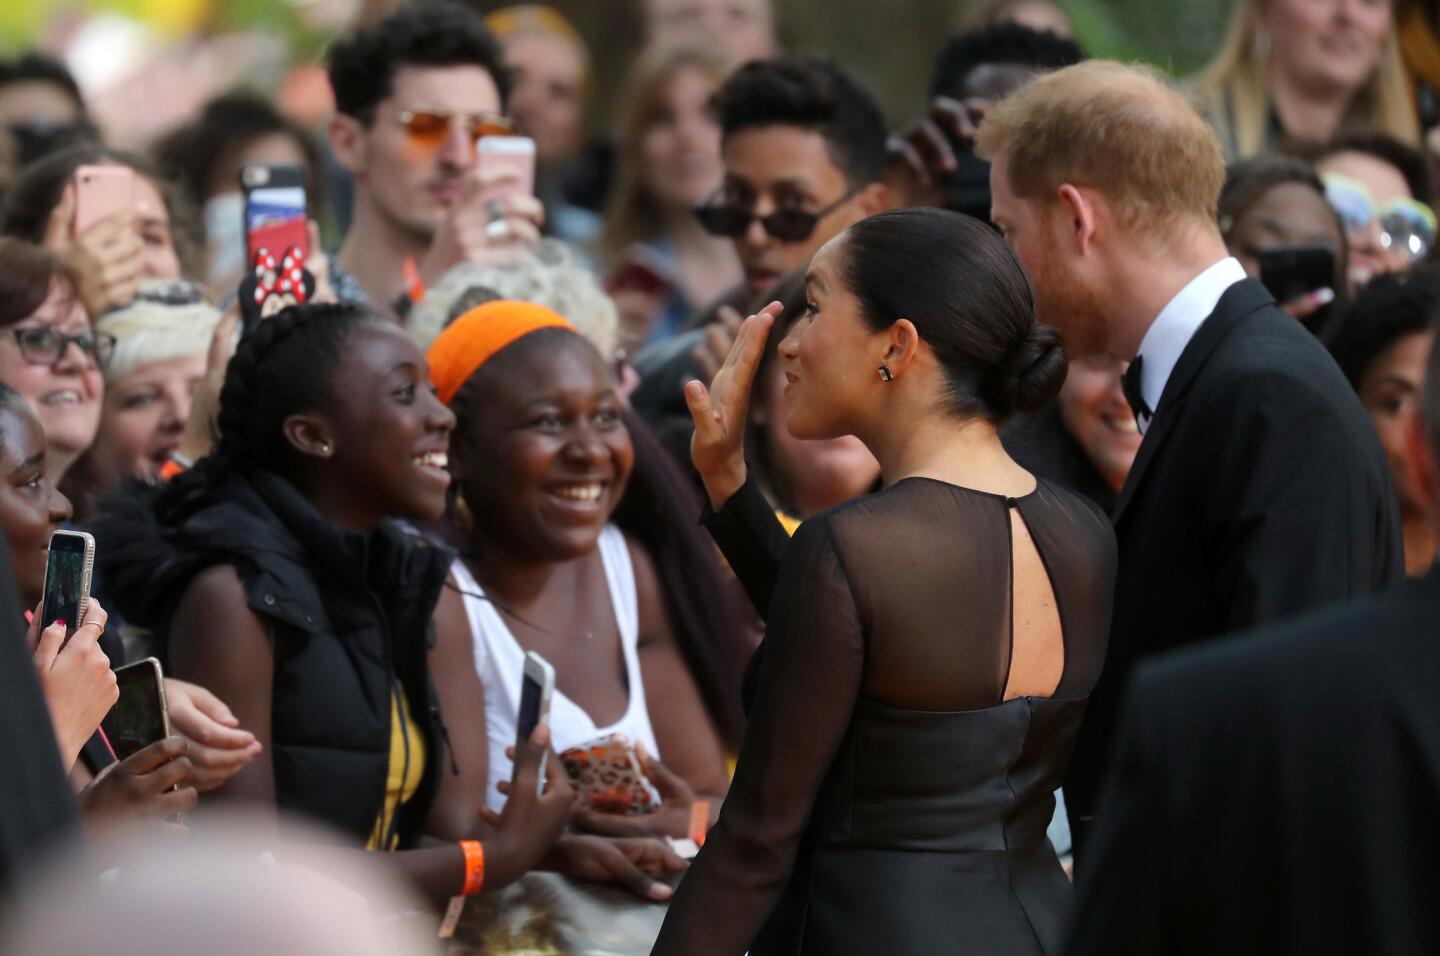 Wellwishers meet Prince Harry, Duke of Sussex and Meghan, Duchess of Sussex as they attend "The Lion King" European premiere at Leicester Square on July 14, 2019 in London, England.